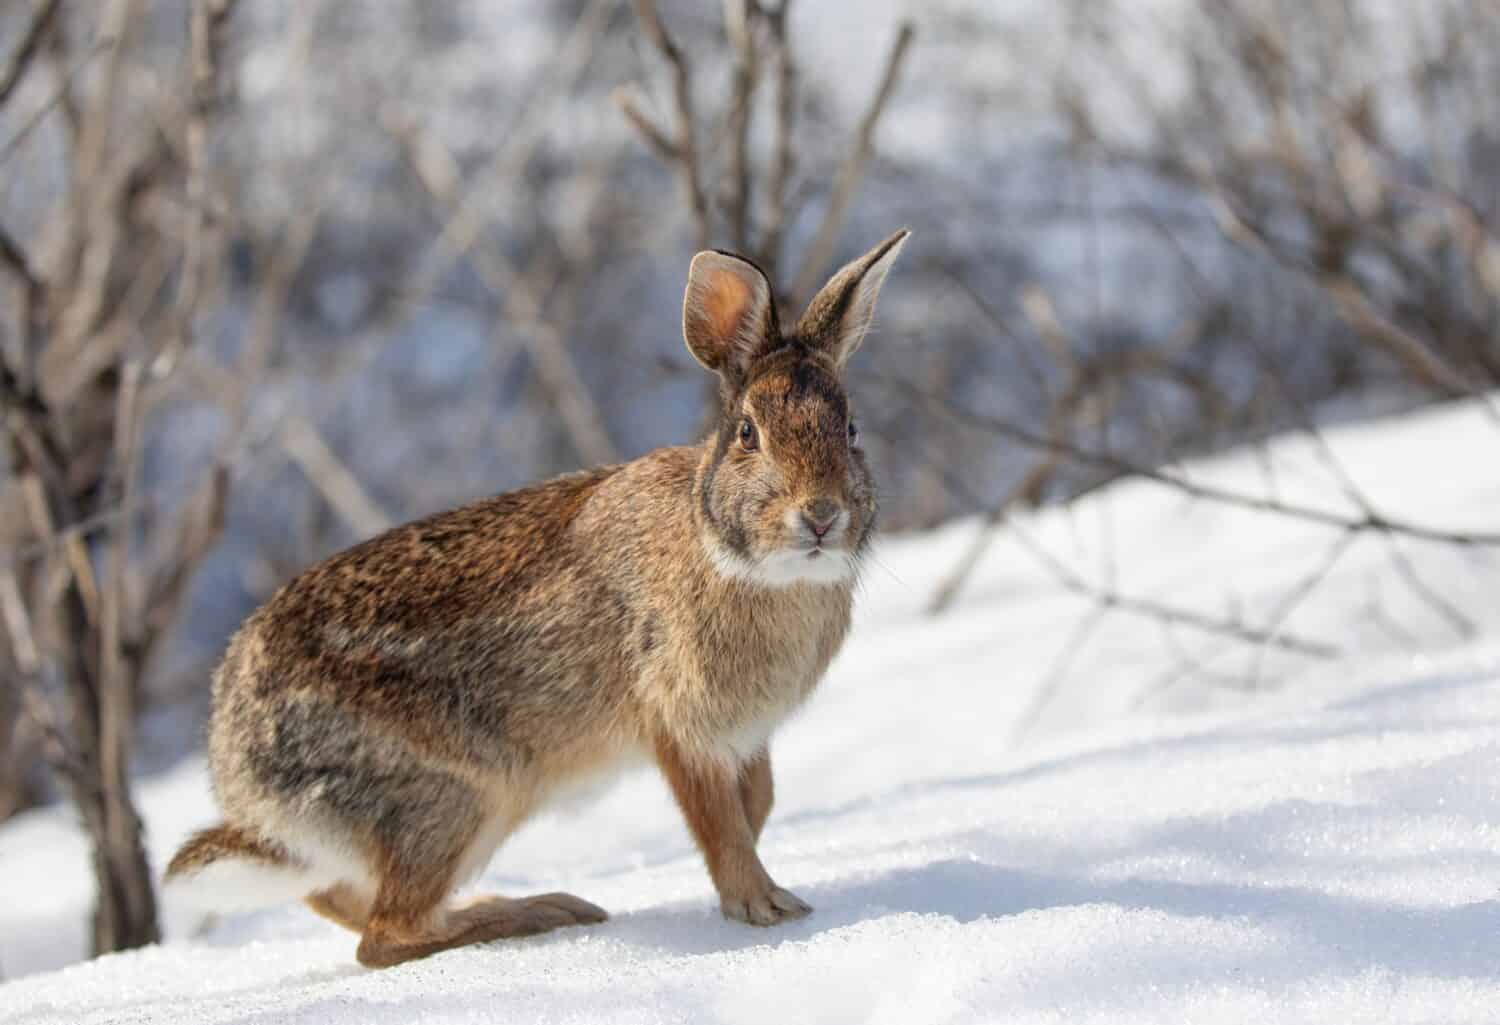 Eastern cottontail rabbit playing in the snow in a winter forest.